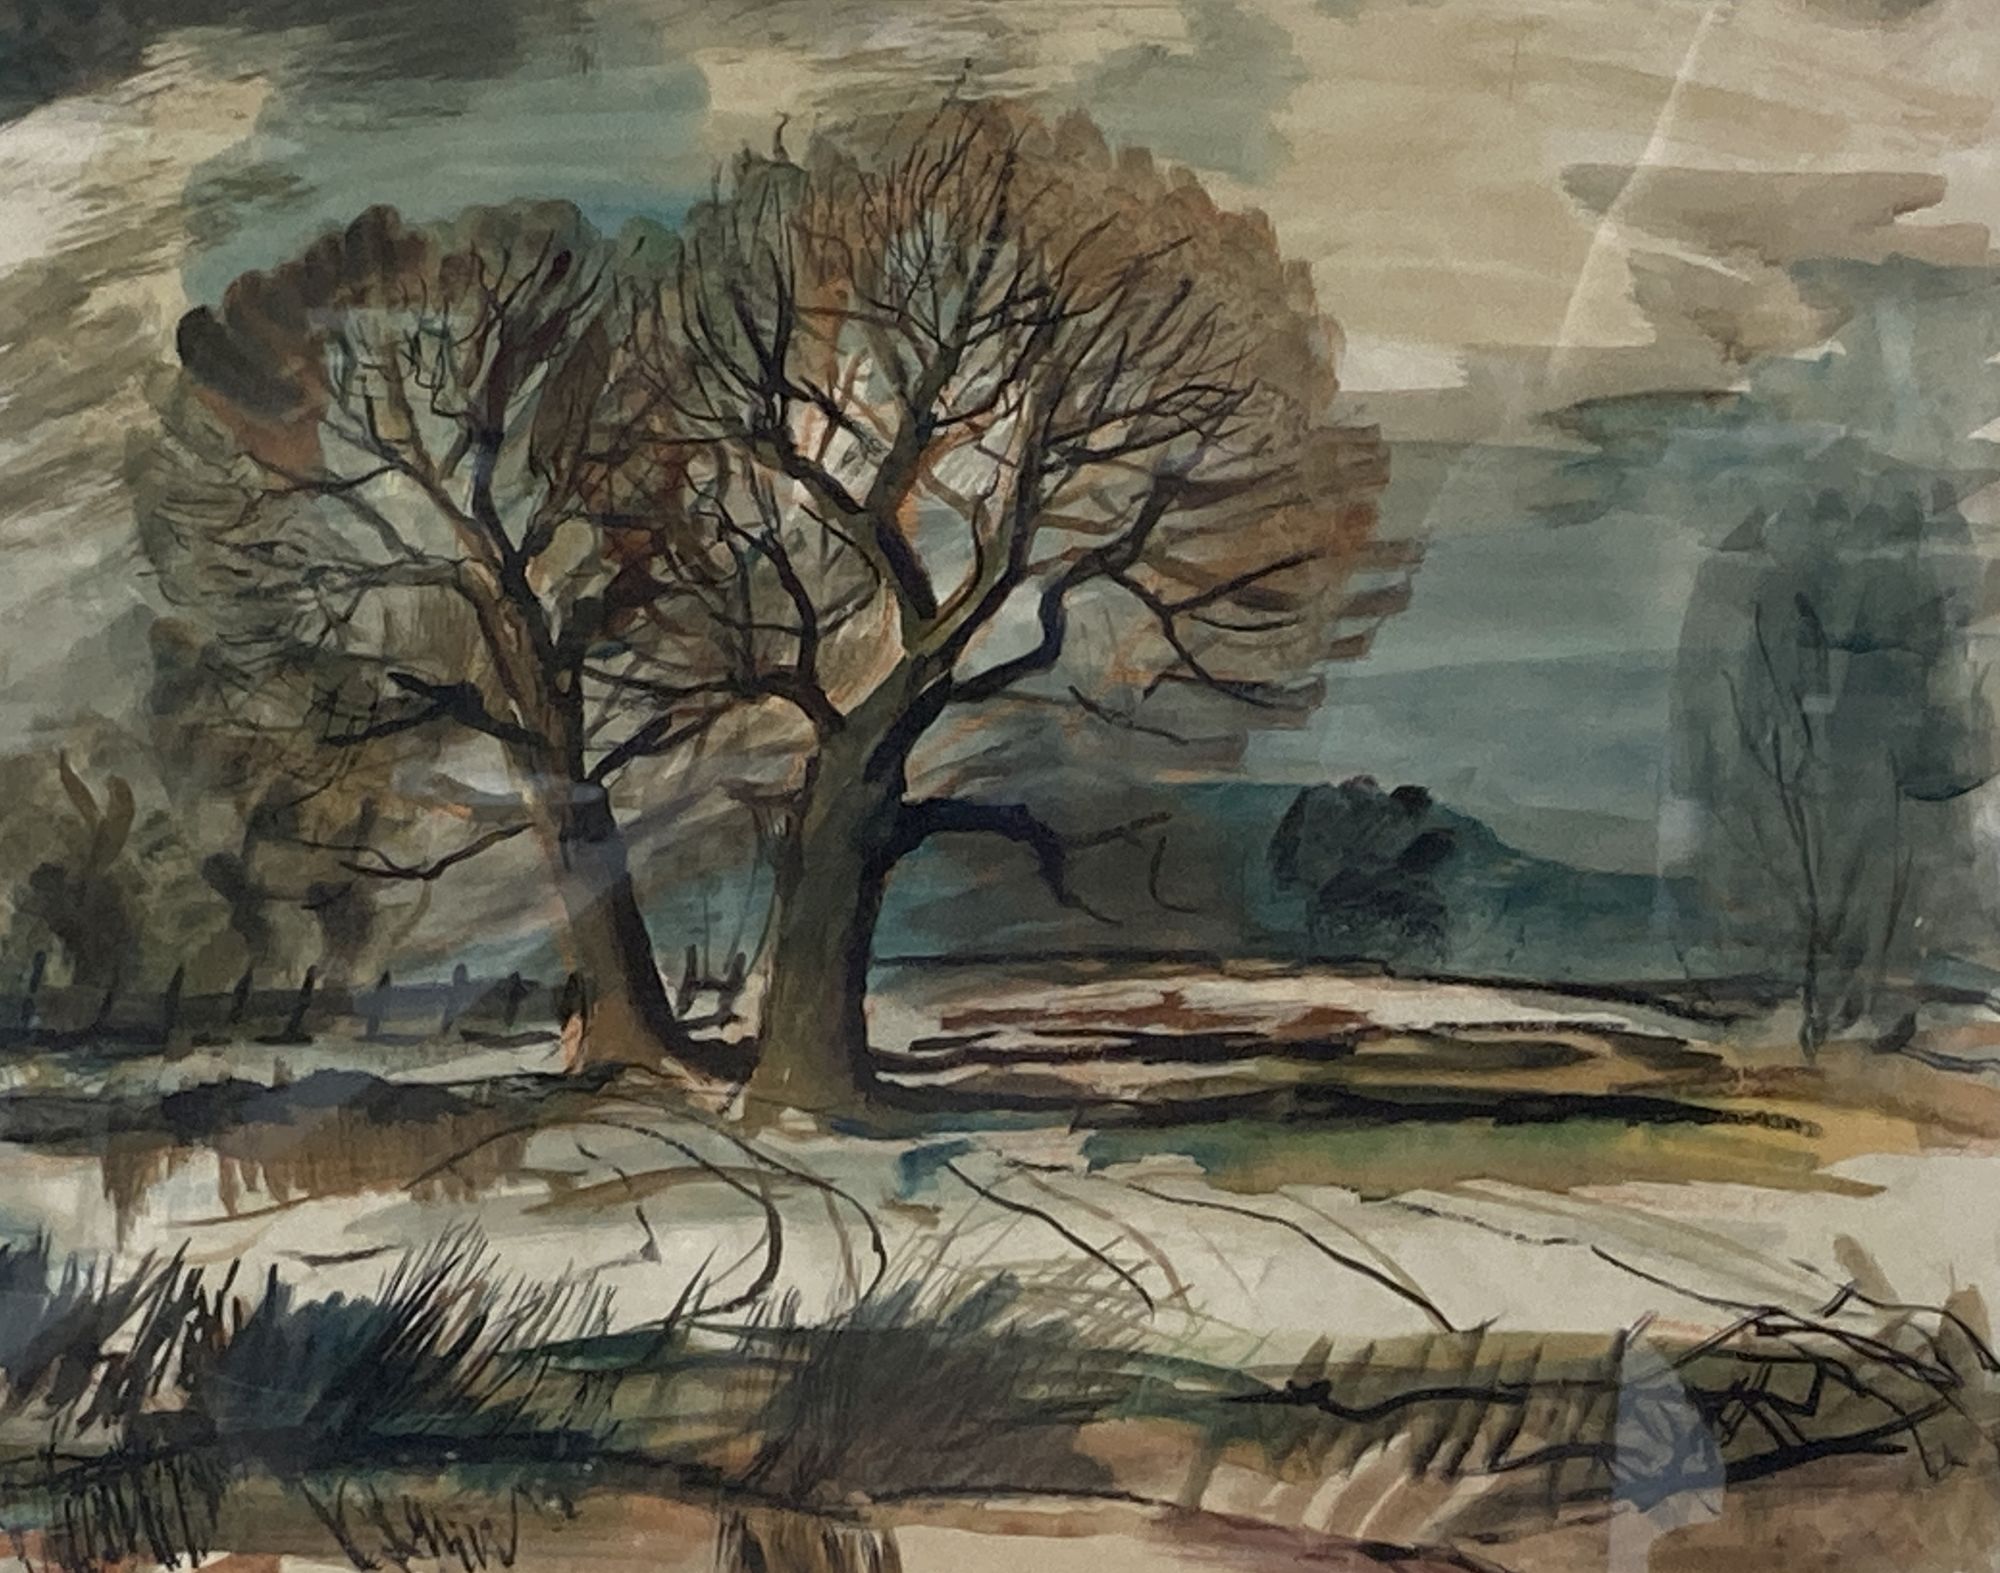 Rowland Suddaby (1912-1973), watercolour, Trees in a landscape, Studio stamp, 32 x 40cm